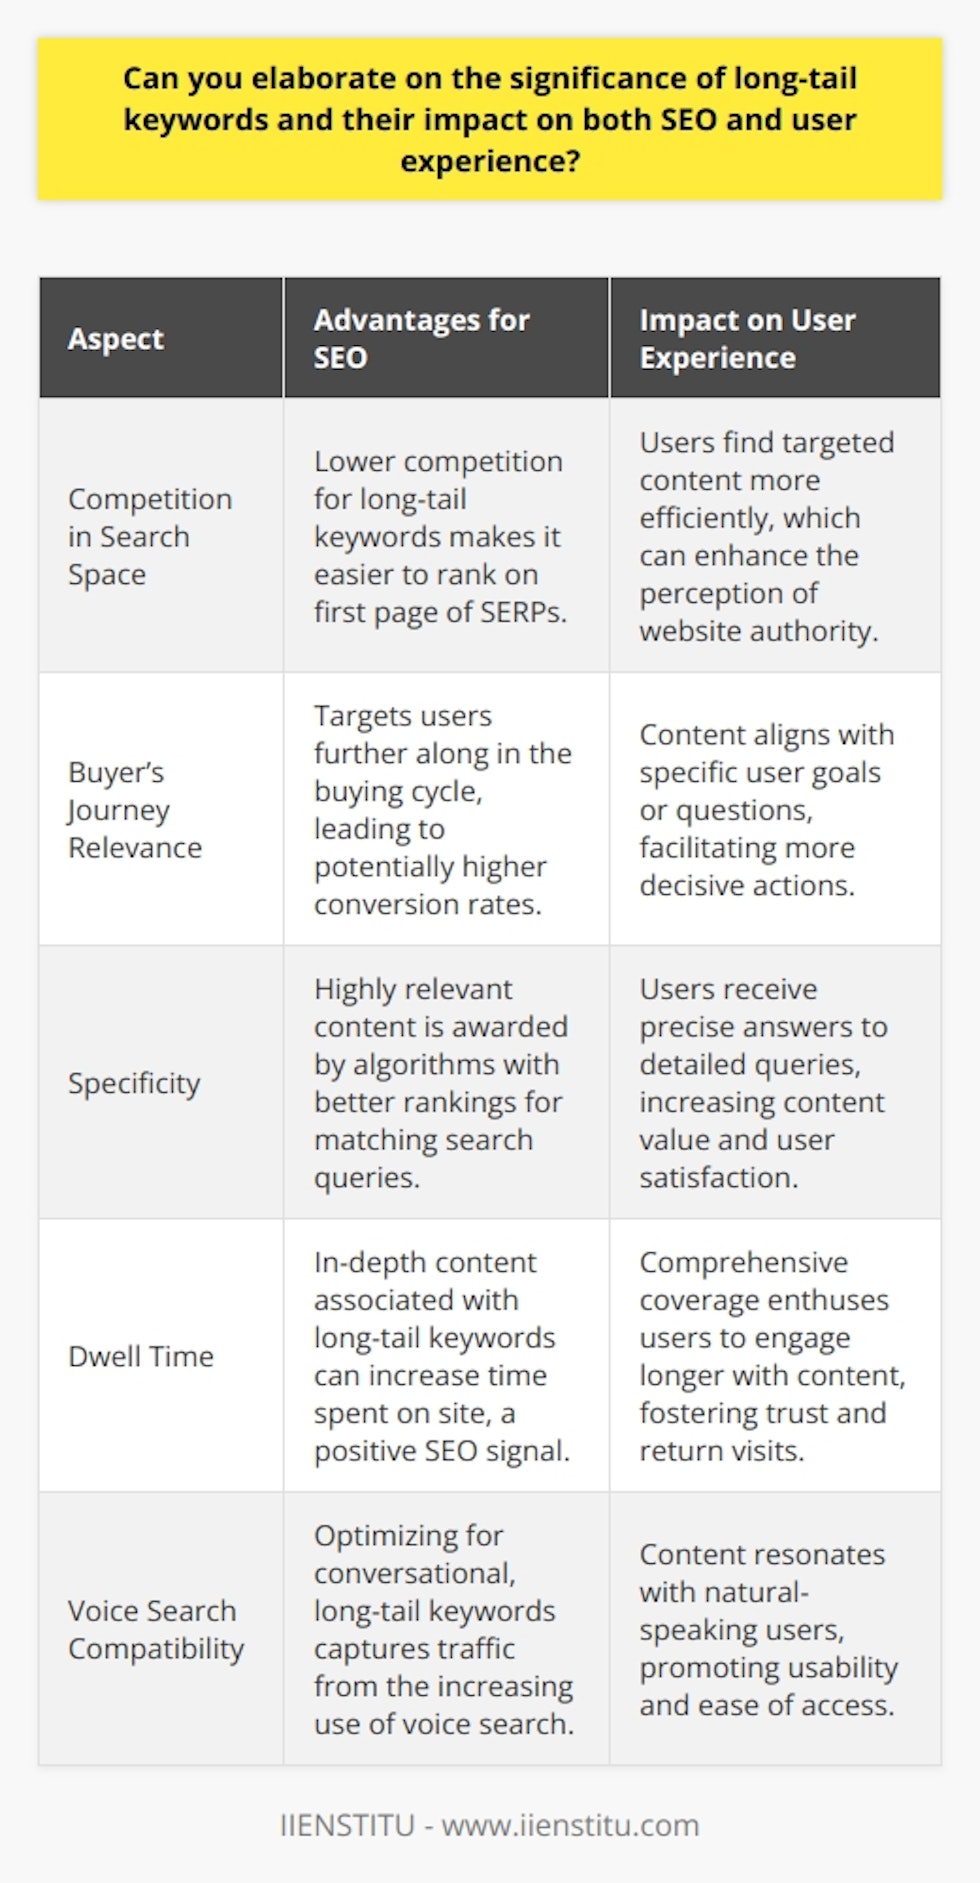 Long-tail keywords and their effective use within content have become increasingly significant as search engines evolve and users search more conversationally, particularly with the rise of voice search. Here we explore the positive impact of long-tail keywords on both Search Engine Optimization (SEO) and user experience.SEO AdvantagesOne of the core benefits of long-tail keywords in SEO involves the ability to compete in a less saturated search space. While shorter keywords may have huge volumes of search traffic, they also come with intense competition. Long-tail keywords, however, have lower competition, which increases the likelihood of a website ranking on the first page of SERPs.Moreover, long-tail keywords usually correspond to later stages of the buyer’s journey. When users search with these specific phrases, they often possess a higher intent to take action, such as making a purchase or requesting more information. Consequently, conversions from traffic derived from long-tail keywords can be substantially higher than that of broader search terms.Another SEO advantage is specificity. When content is optimized for long-tail keywords, it addresses particular problems or topics, which makes it intensely relevant to the user conducting the search. This relevance is rewarded by search engines where algorithms prioritize content that aligns closely with search queries, therefore boosting the ranking of such content.User Experience EnhancementThe specificity of long-tail keywords also plays a pivotal role in improving user experience. Content that is carefully crafted to answer a user’s detailed query can provide a sense of satisfaction and completion to the user's search effort. When visitors find exactly what they are looking for without having to sift through irrelevant information, they often perceive the website as more valuable and authoritative.Moreover, long-tail keyword optimization often results in comprehensive content that covers a topic in-depth. This can increase the time users spend on a site (also known as “dwell time”), which can be a positive signal to search engines and contribute further to a site’s SEO performance. Additionally, when users interact with content that appears tailor-made for their specific needs, it can foster trust and loyalty, leading to repeat visits and positive word-of-mouth.Voice Search and Long-Tail KeywordsThe rise of smart devices and voice assistants has changed the way people search. Voice search queries tend to be longer and more conversational. The natural language used in voice searches often mimics long-tail keyword phrases. By optimizing for these longer phrases, websites can capture this growing segment of search traffic.In conclusion, long-tail keywords represent a critical component of contemporary SEO strategies and user experience design. By understanding and leveraging these specific phrases, businesses can achieve higher organic rankings, attract qualified traffic, and satisfy users with relevant, in-depth content that meets their exact needs. An education platform, such as IIENSTITU, which specializes in digital marketing and SEO could offer the necessary expertise and resources to master the art of long-tail keyword optimization, facilitating better search performance and user satisfaction.